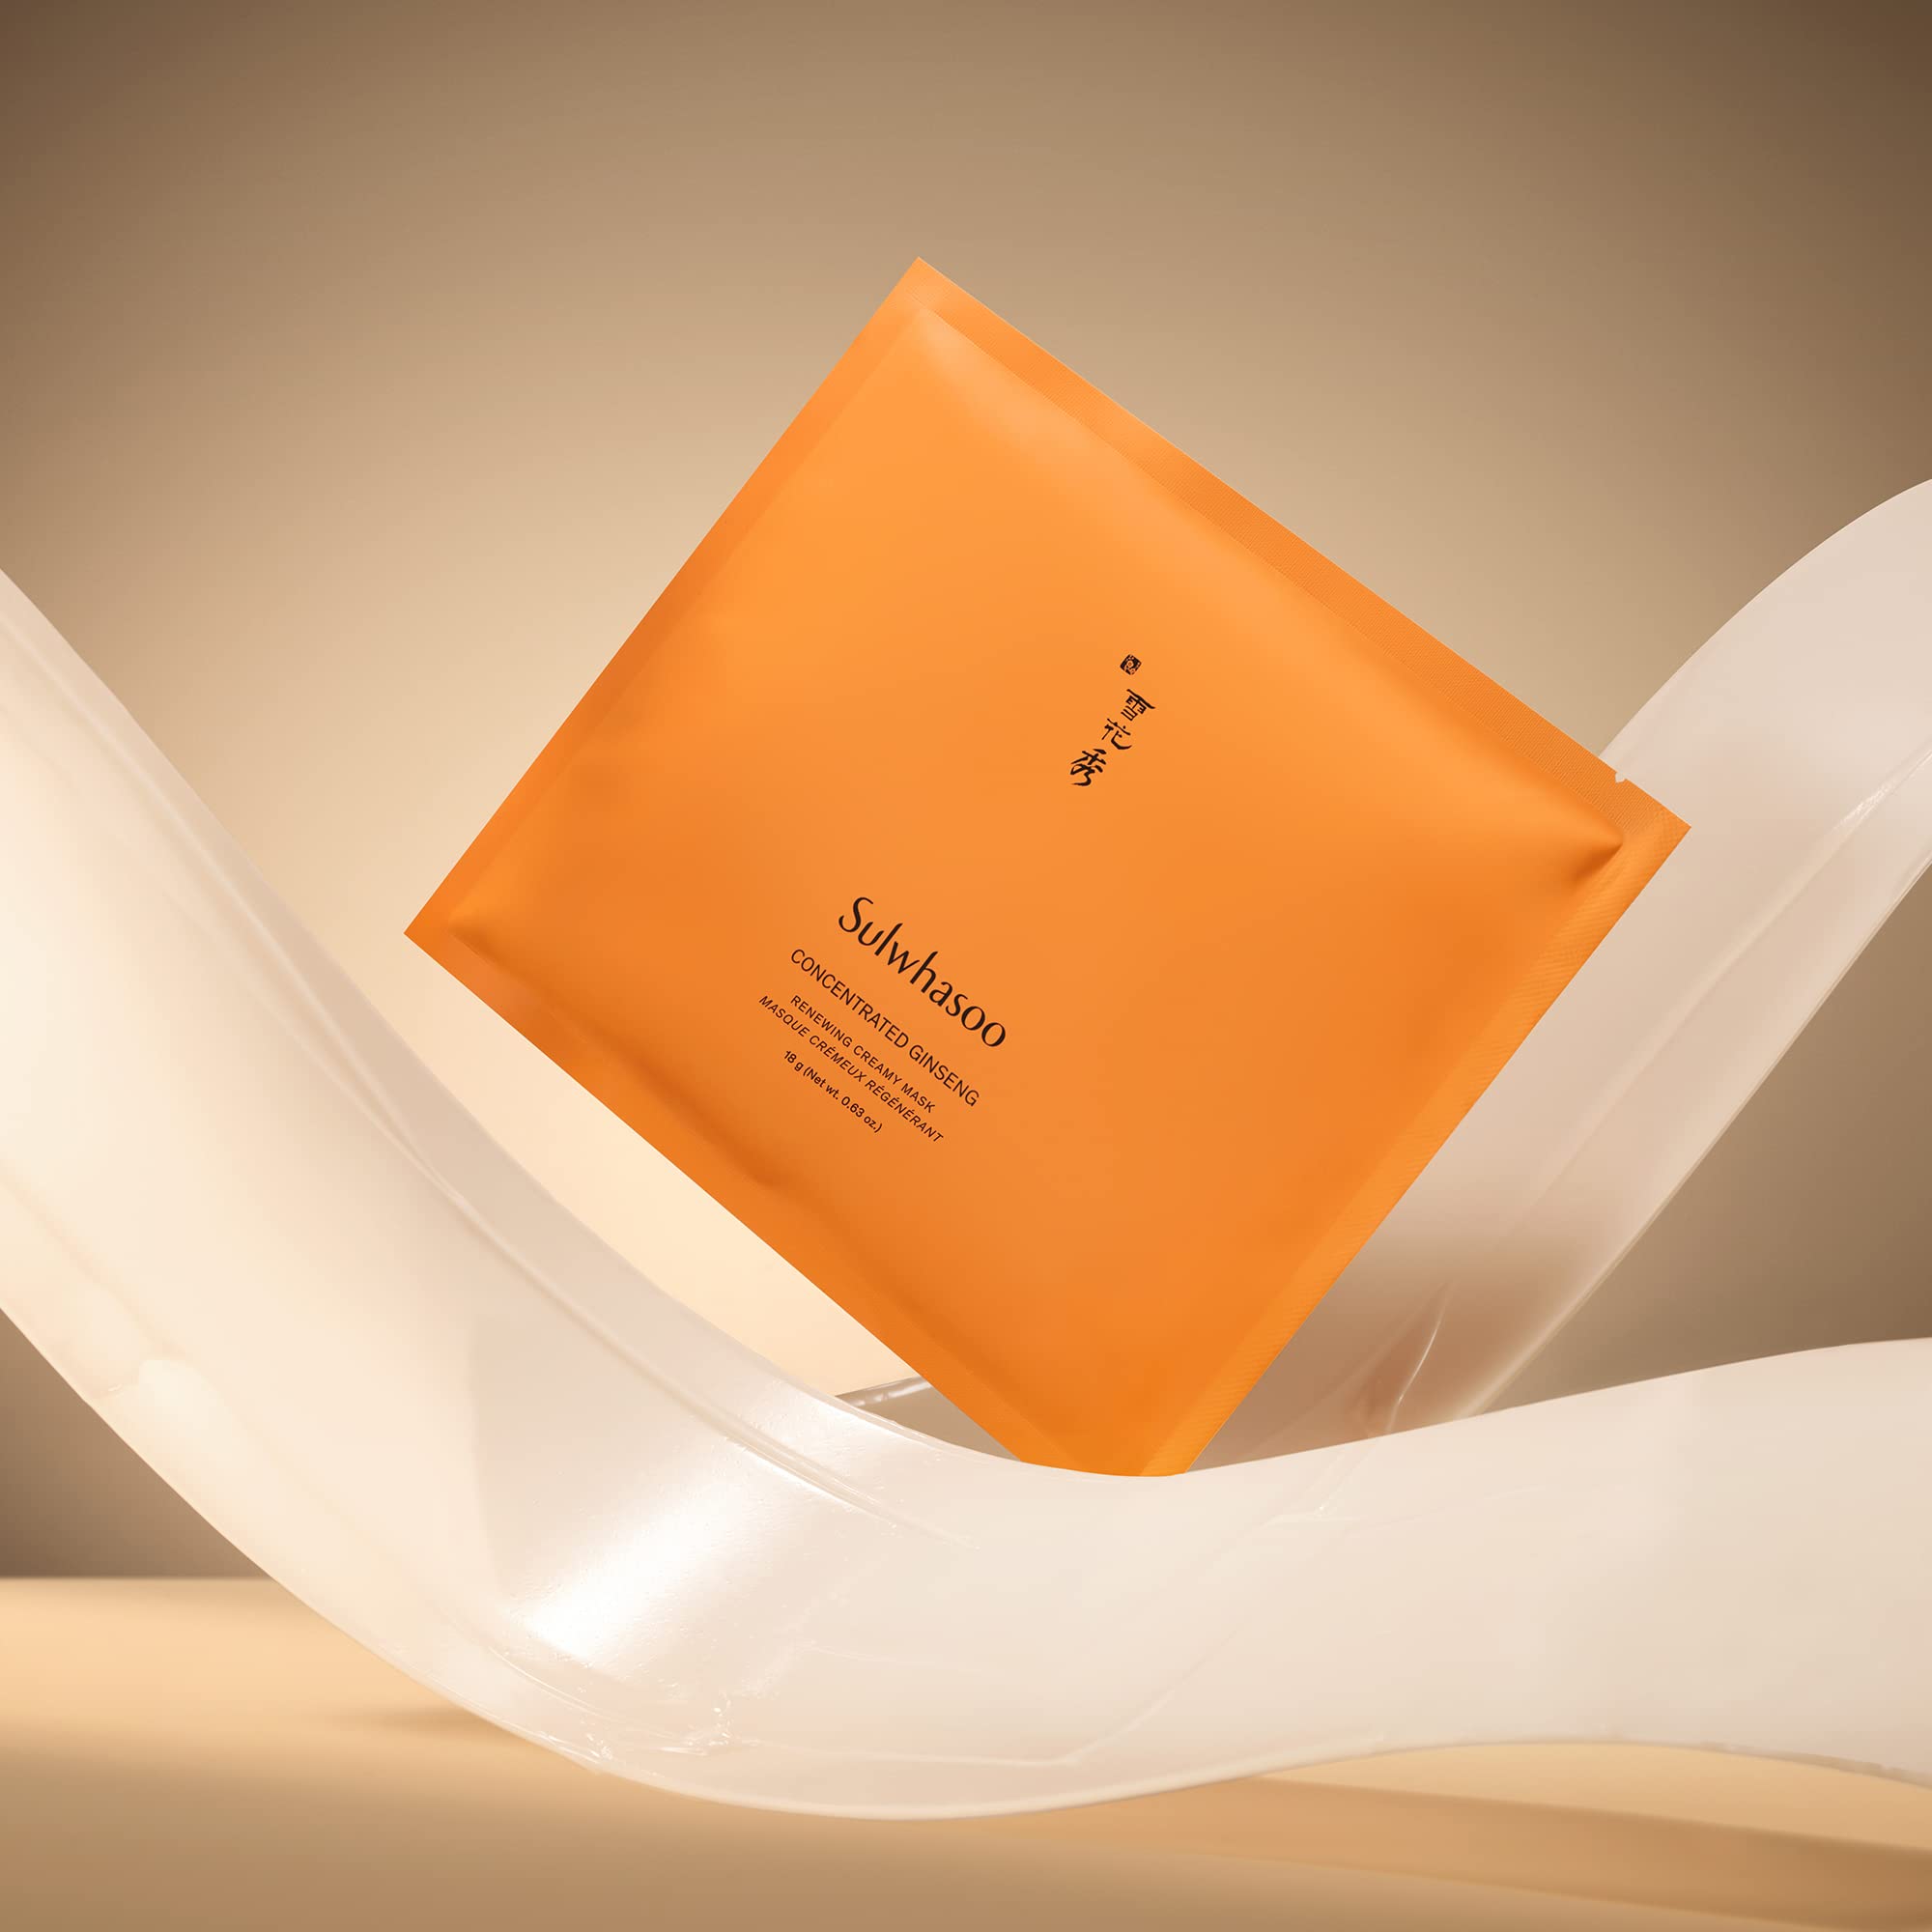 Sulwhasoo Concentrated Ginseng Renewing Creamy Mask EX Korean Beauty